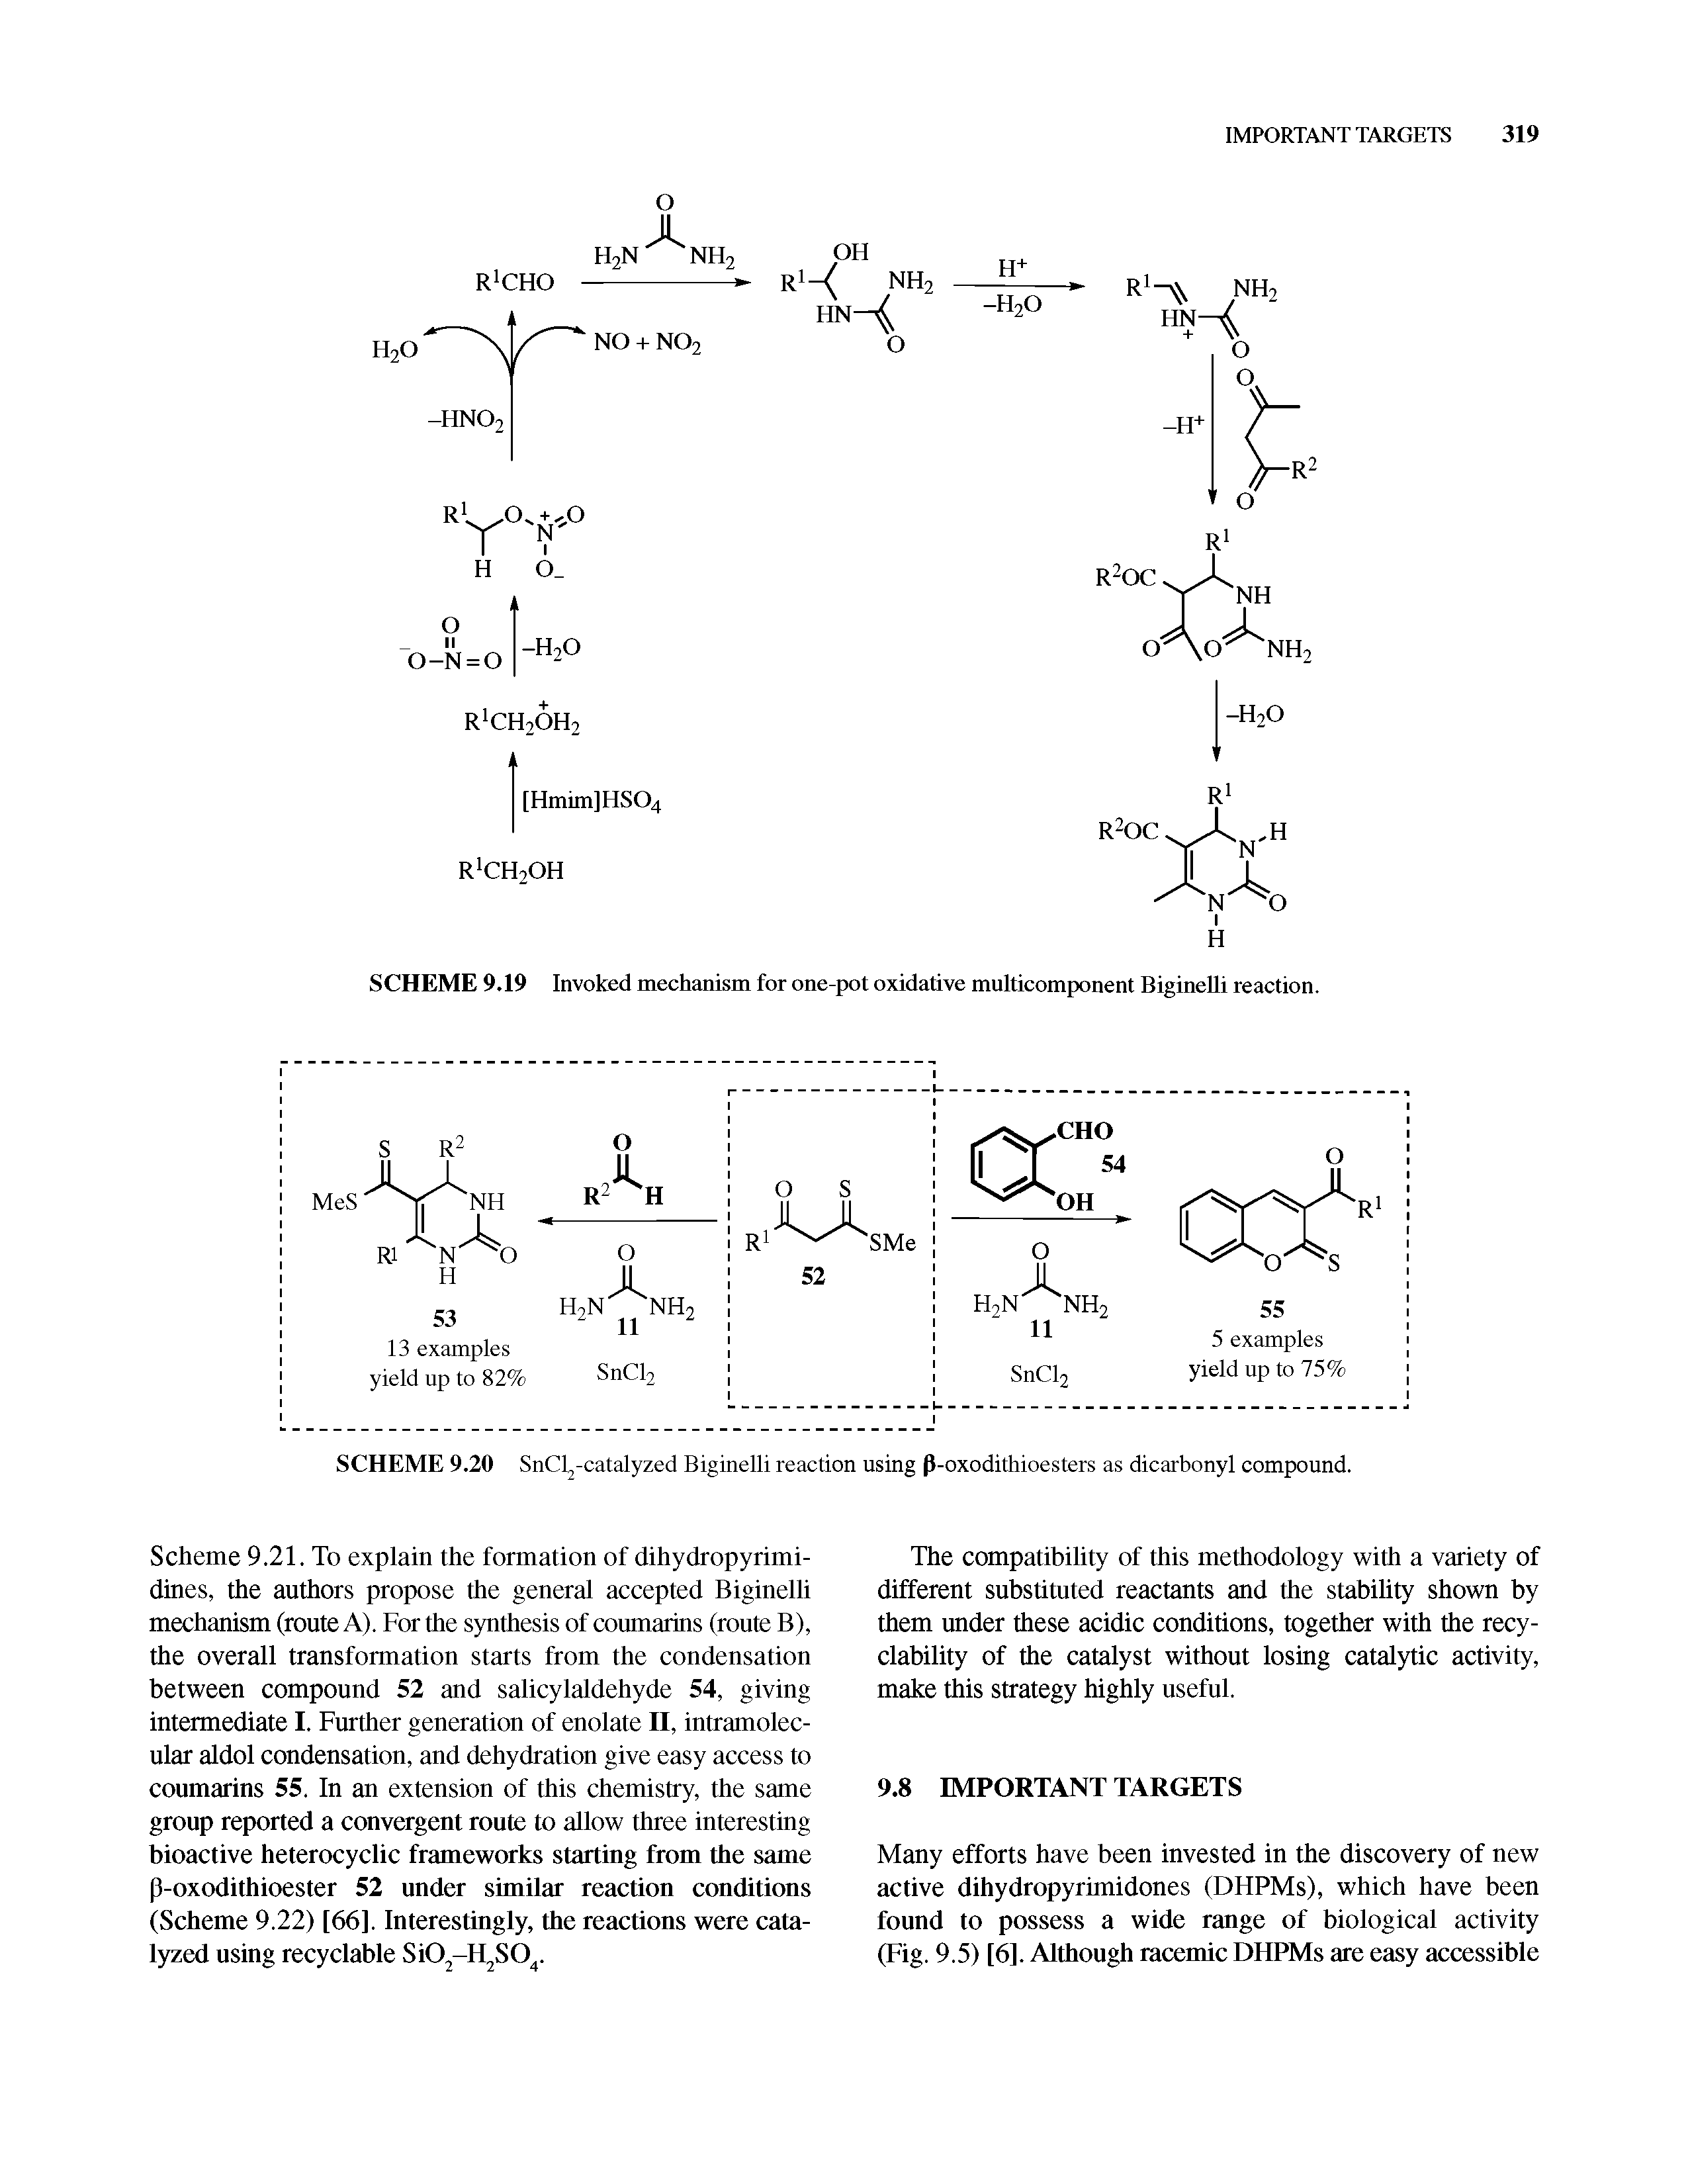 Scheme 9.21. To explain the formation of dihydropyrimidines, the authors propose the general accepted BigineUi mechanism (route A). For the synthesis of conmarins (ronte B), the overall transformation starts from the condensation between compound 52 and salicylaldehyde 54, giving intermediate I. Further generation of enolate II, intramolecular aldol condensation, and dehydration give easy access to coumarins 55. In an extension of this chemistry, the same group reported a convergent route to allow three interesting bioactive heterocyclic frameworks starting from the same P-oxodithioester 52 under similar reaction conditions (Scheme 9.22) [66]. Interestingly, the reactions were catalyzed using recyclable SiO -H SO. ...